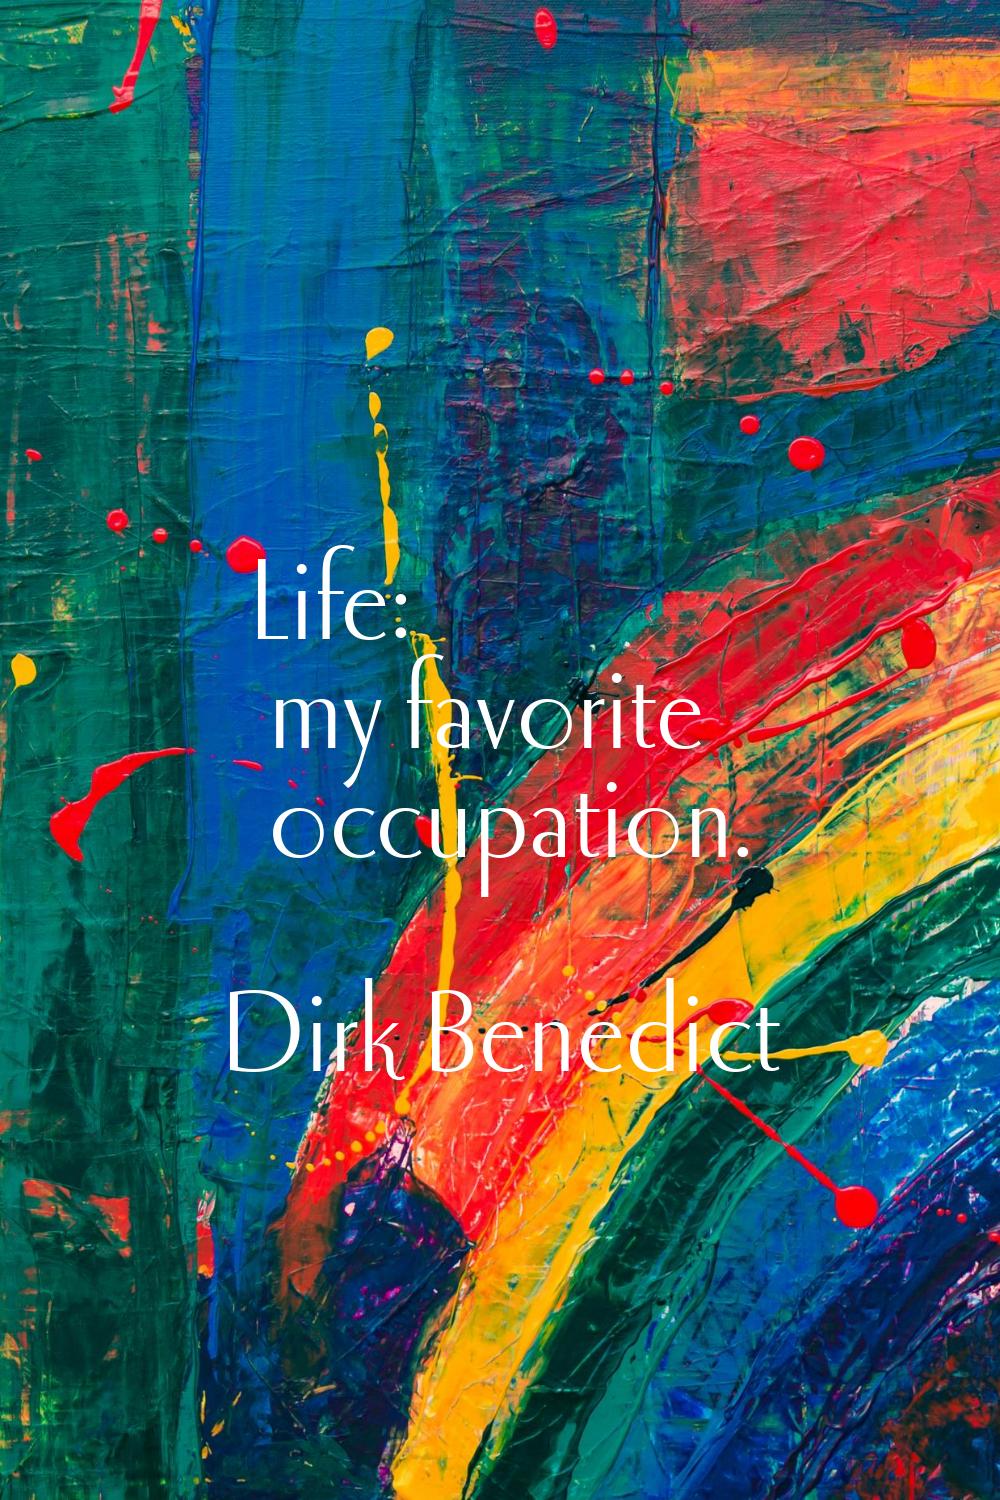 Life: my favorite occupation.